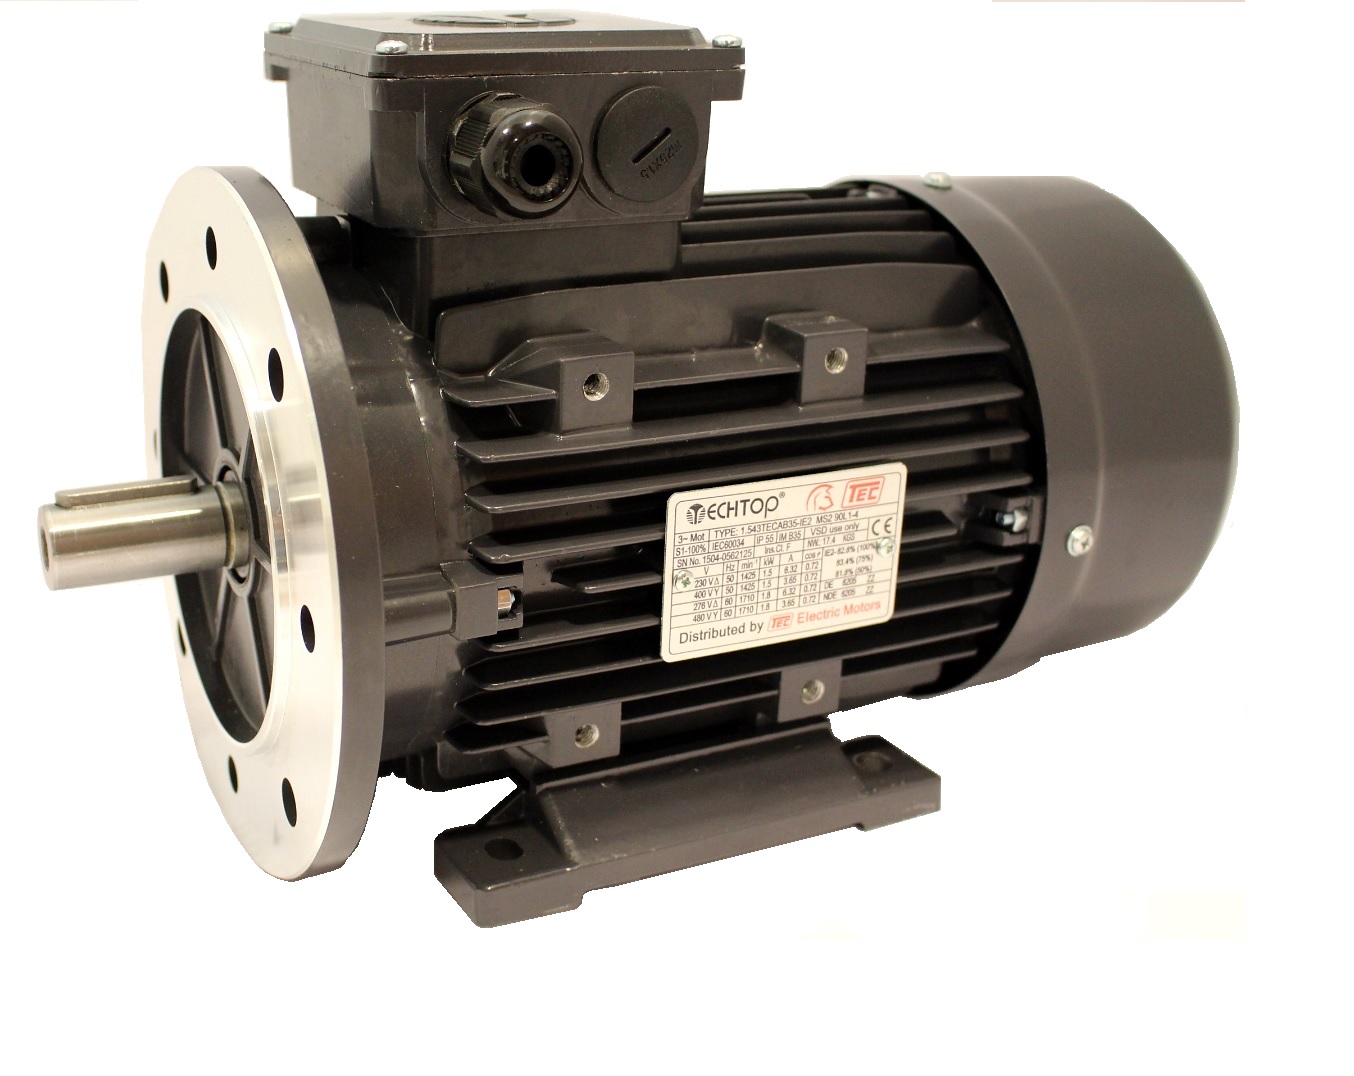 Three Phase 400v Electric Motor, 11.0Kw 2 pole 3000rpm with flange and foot mount IE2